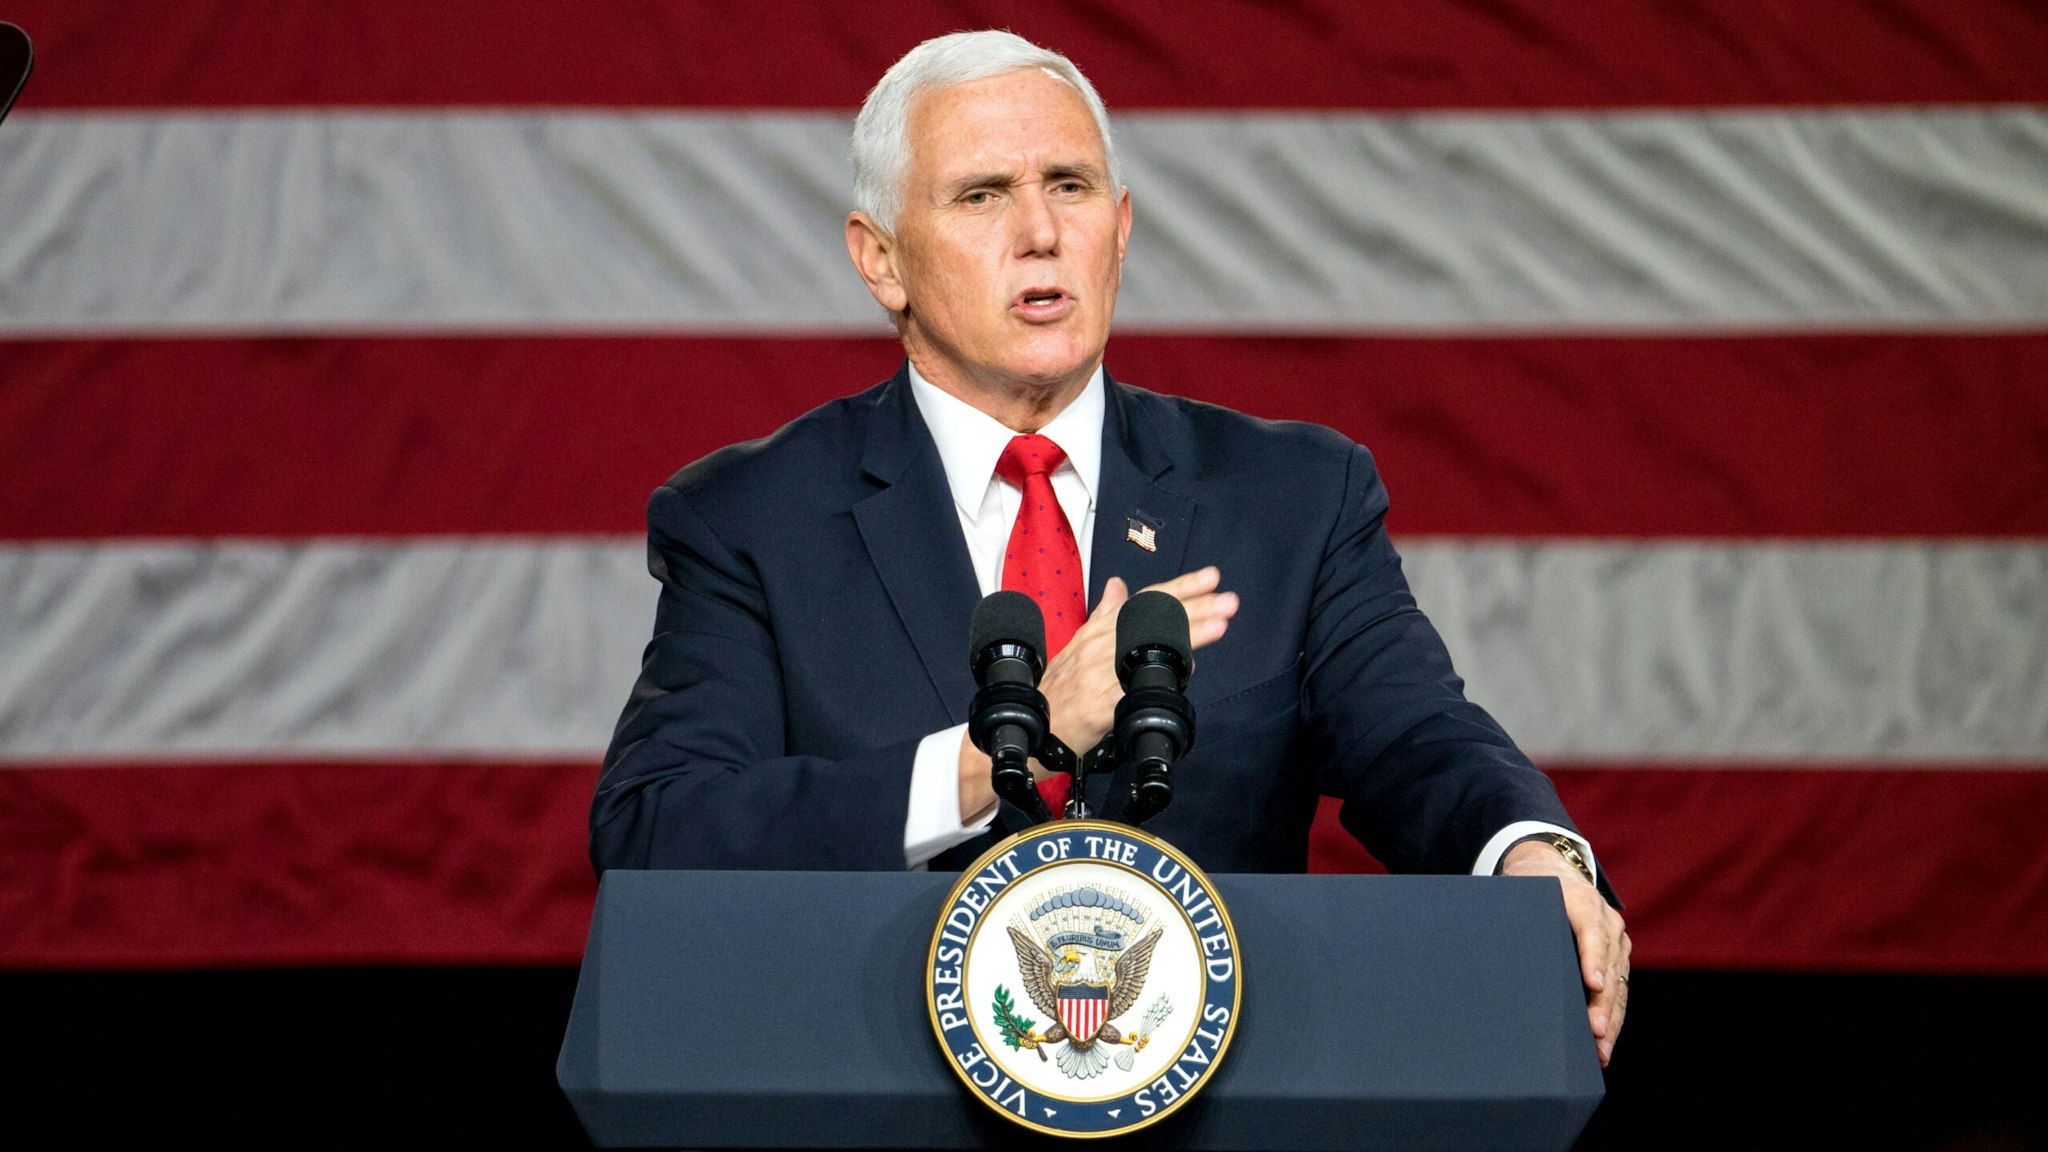 MILNER, GA - JANUARY 04: U.S. Vice President Mike Pence speaks during a visit to Rock Springs Church to campaign for GOP Senate candidates on January 4, 2021 in Milner, Georgia. Tomorrow is the final day for Georgia voters to vote for U.S. Senators Republican incumbents David Perdue and Kelly Loeffler or Democratic Candidates John Ossoff and Raphael Warnock.